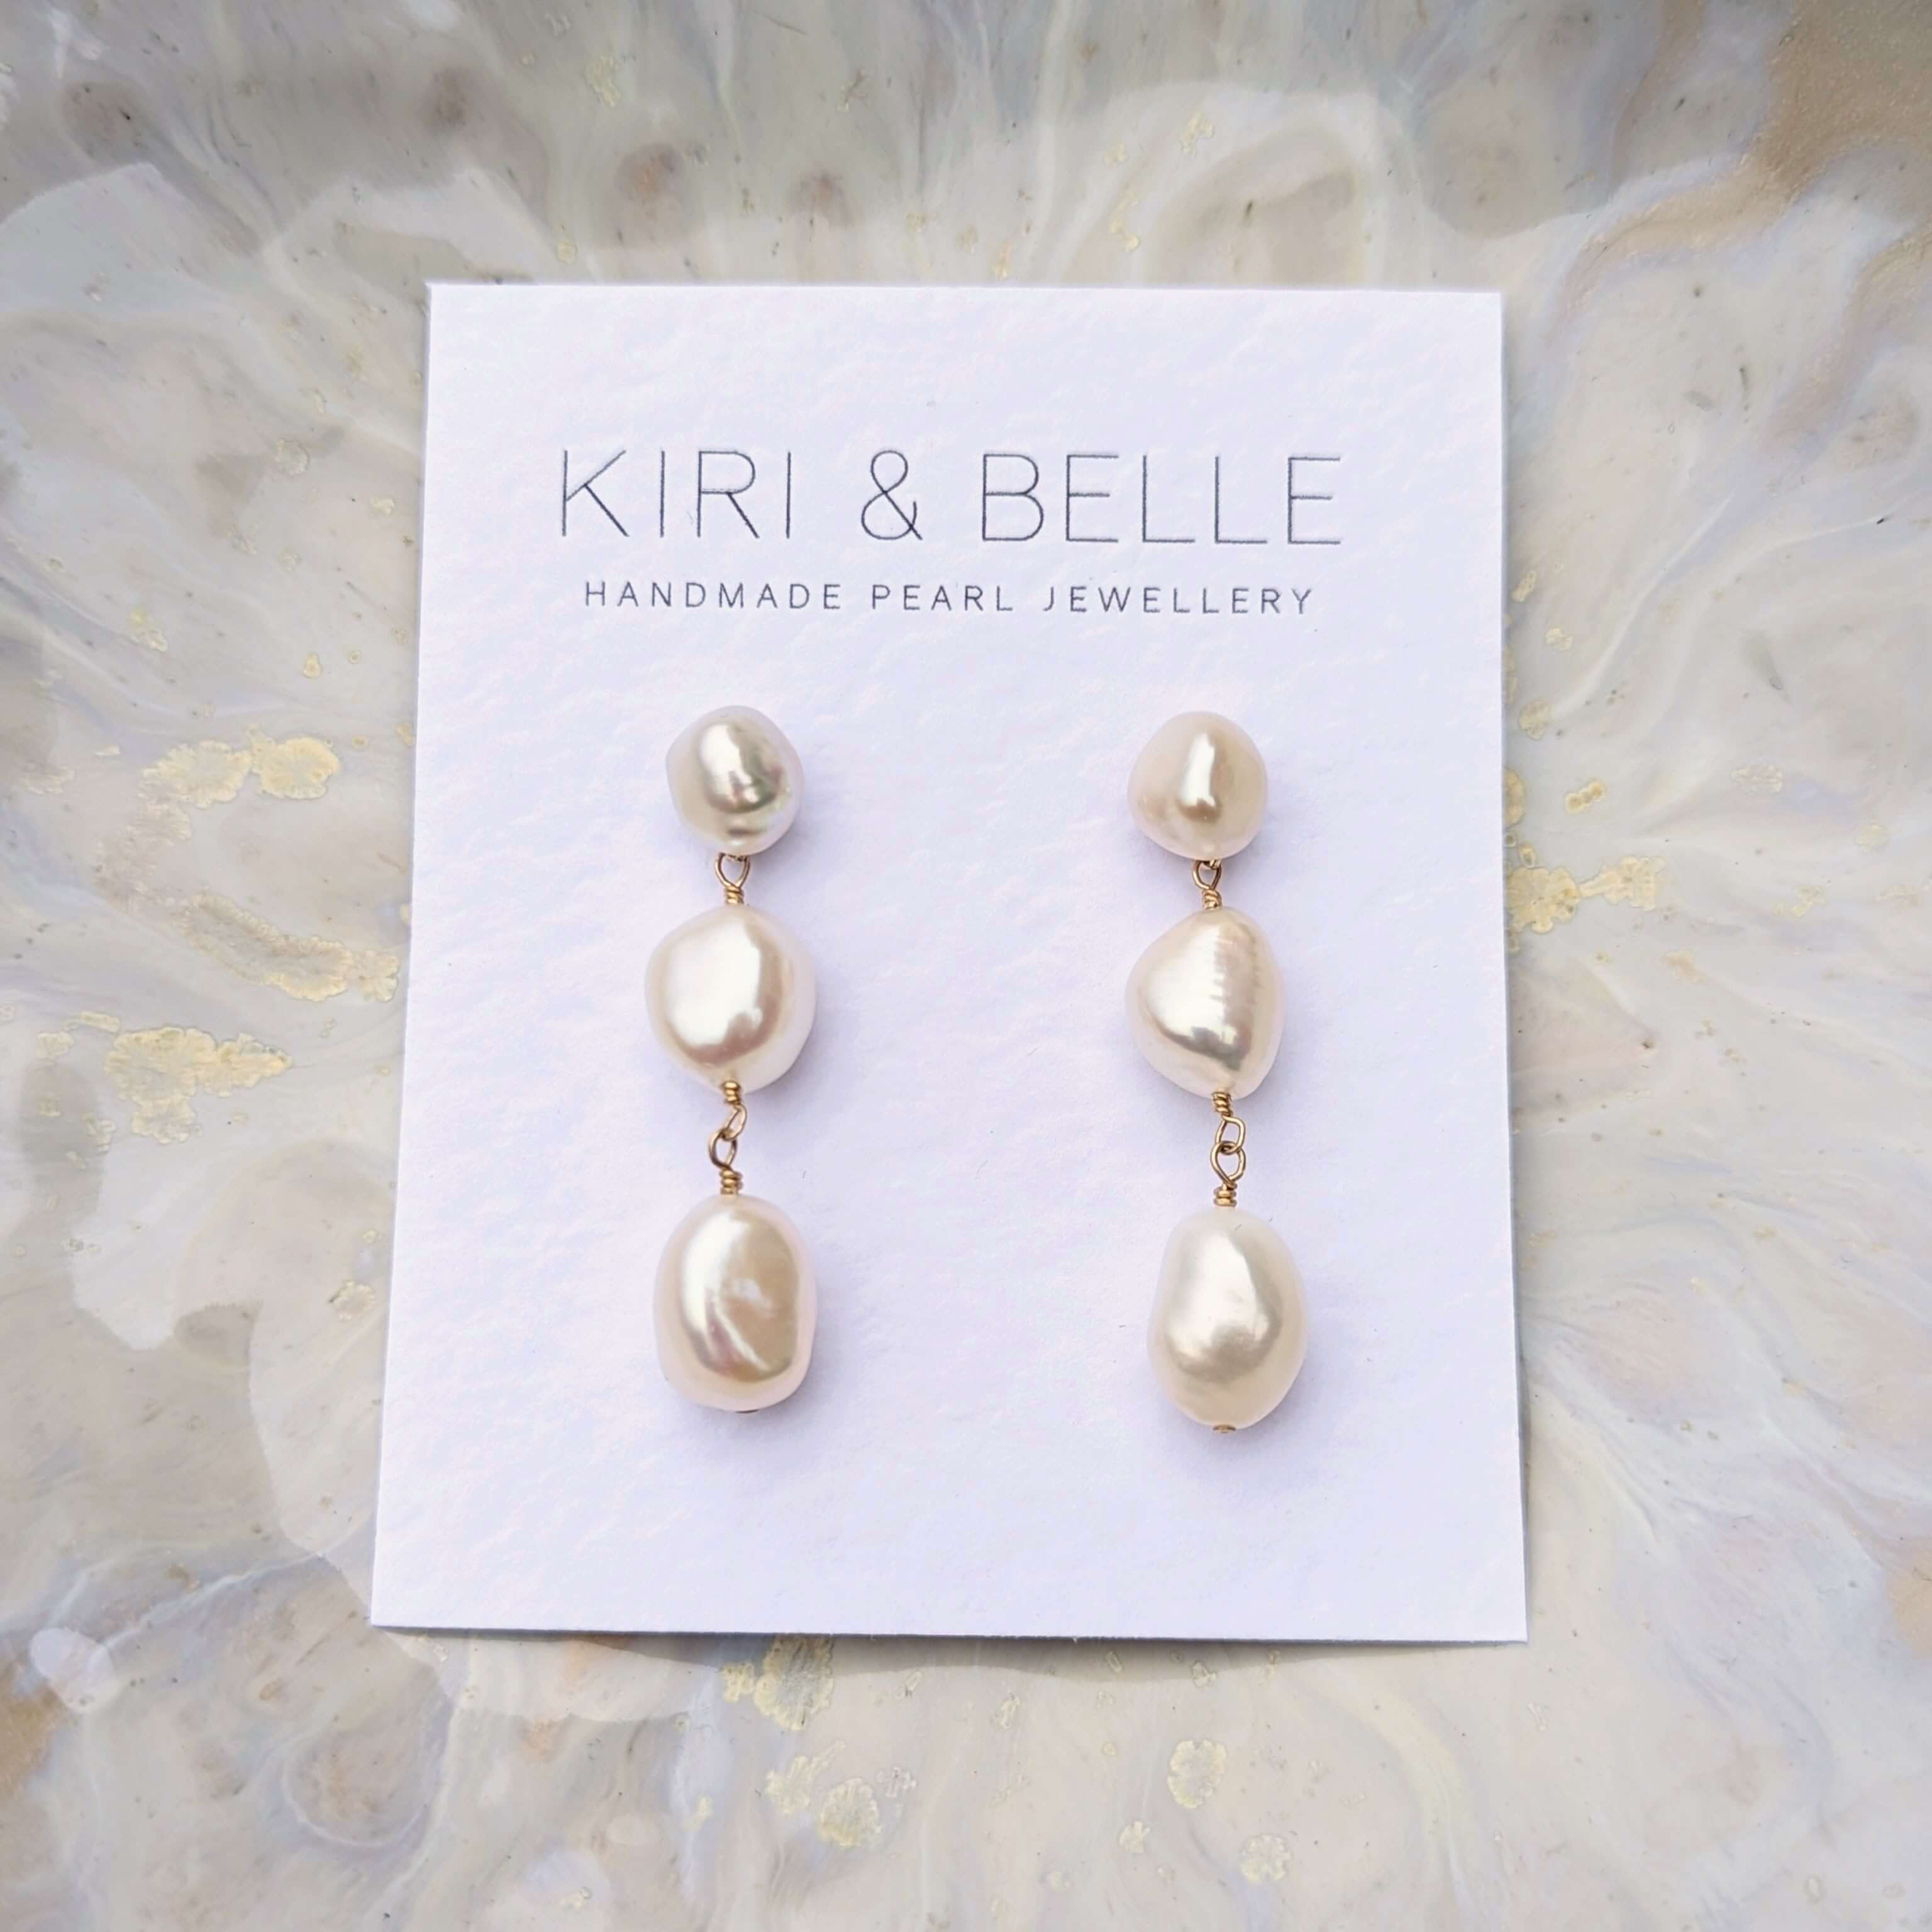 Three pearl drop earrings in gold filled on a white card